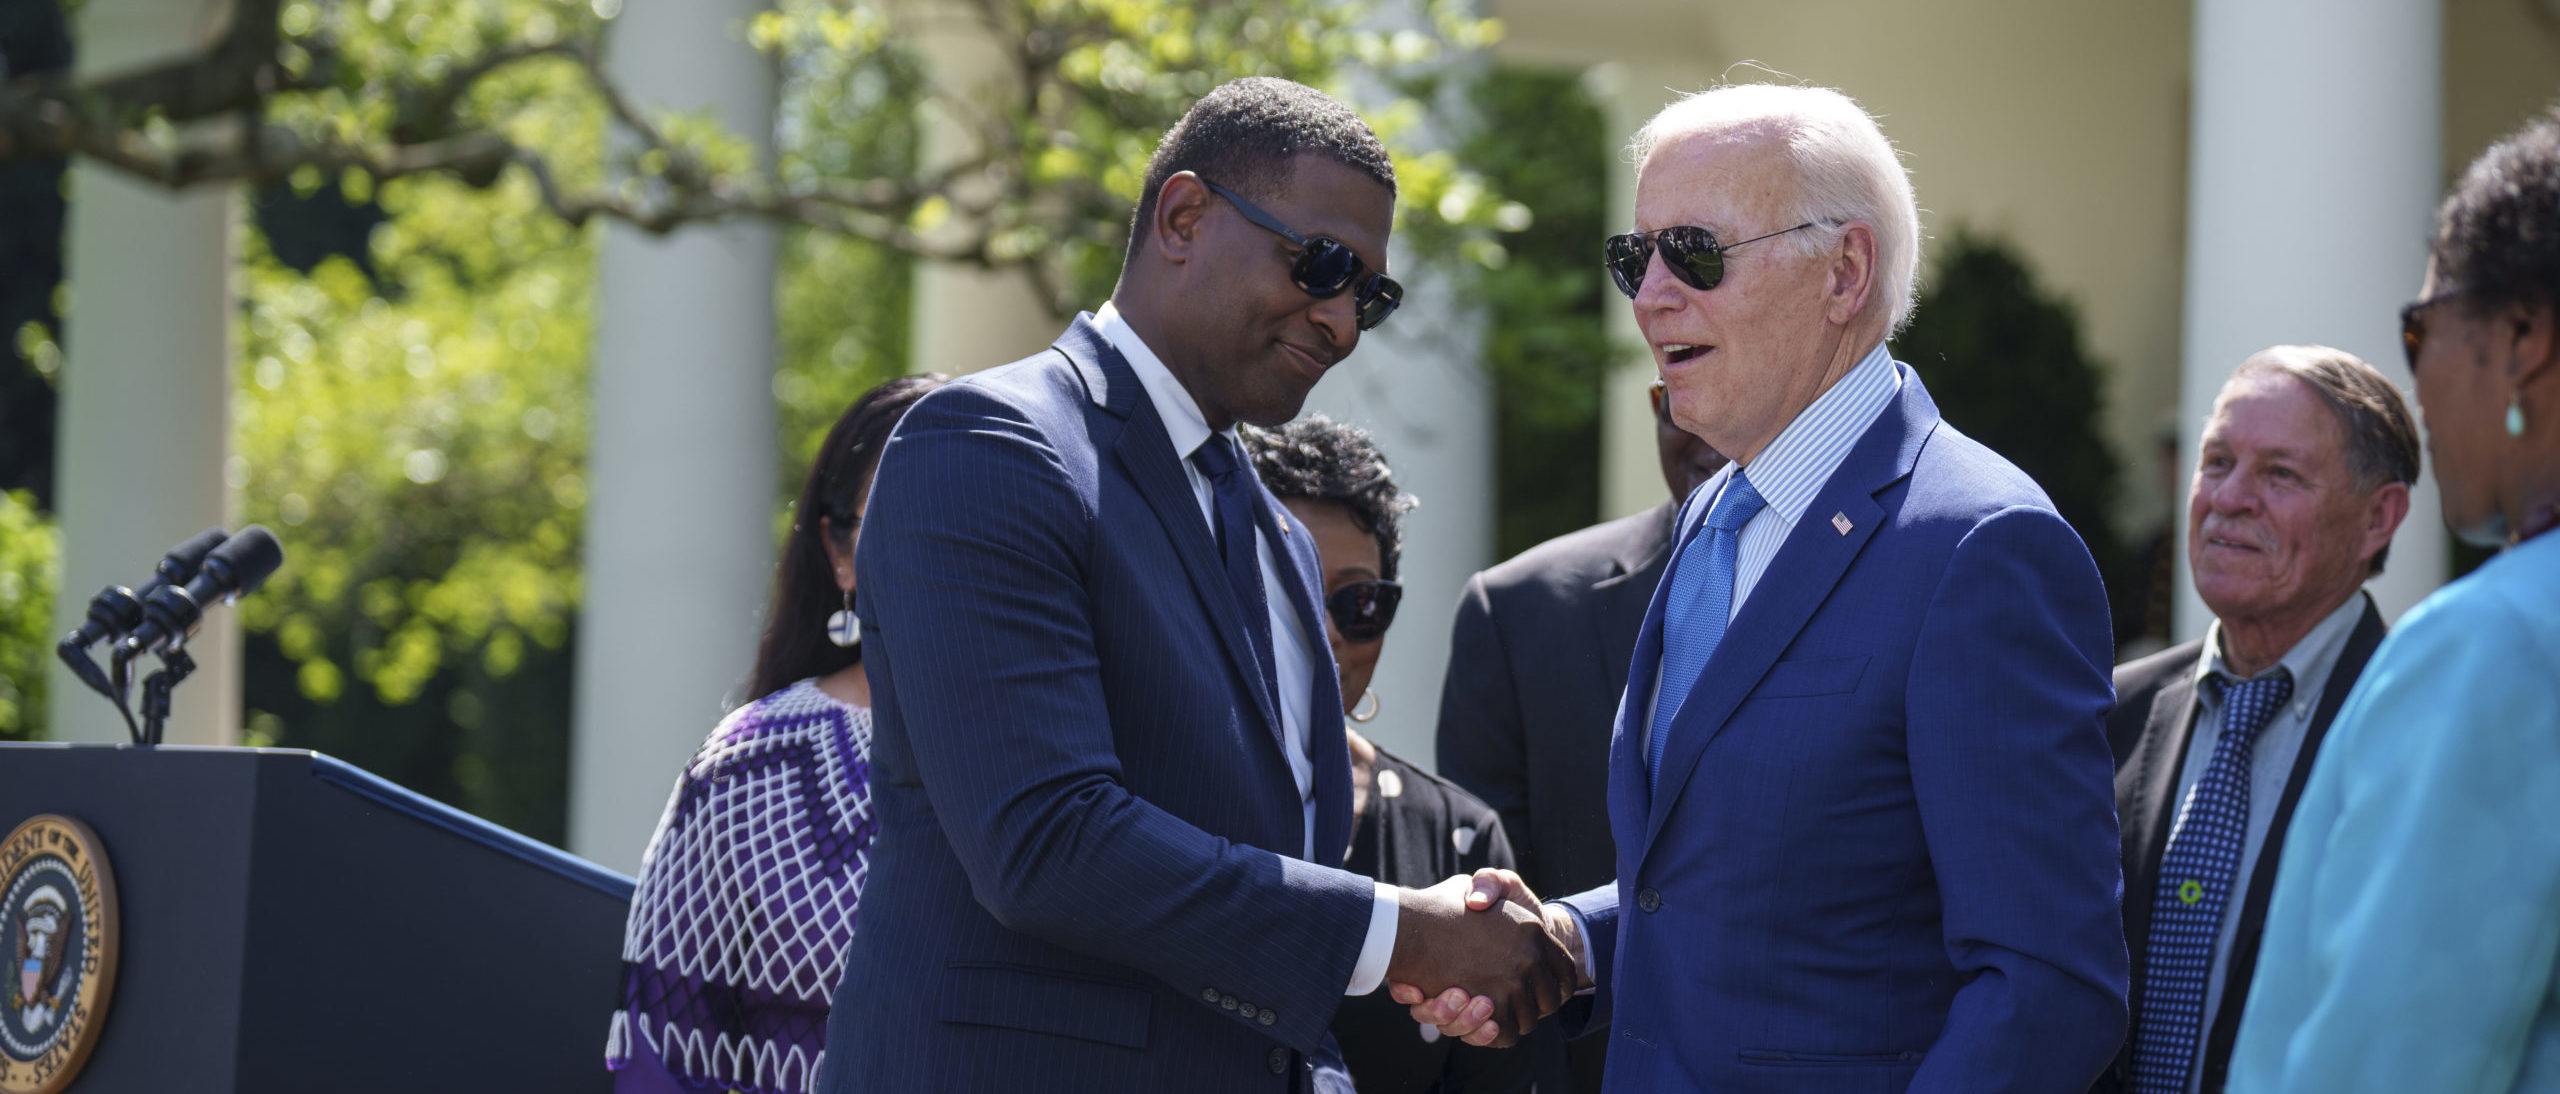 President Joe Biden shakes hands with EPA Administrator Michael Regan after signing an executive order that would create the White House Office of Environmental Justice, in the Rose Garden of the White House April 21, 2023 in Washington, D.C. 